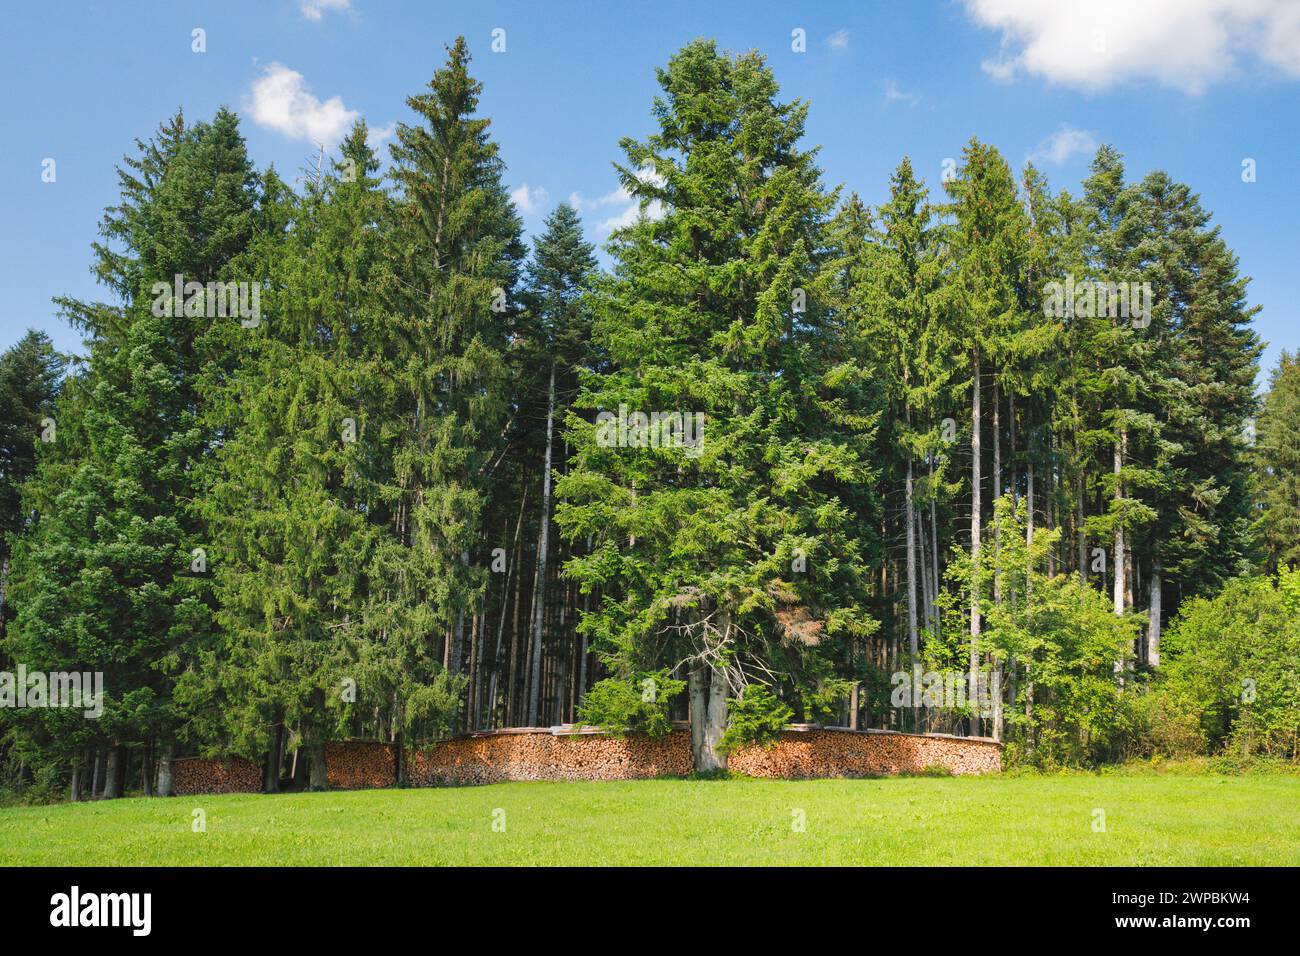 Norway spruce (Picea abies), woodpile at the edge of a spruce forest, Switzerland Stock Photo